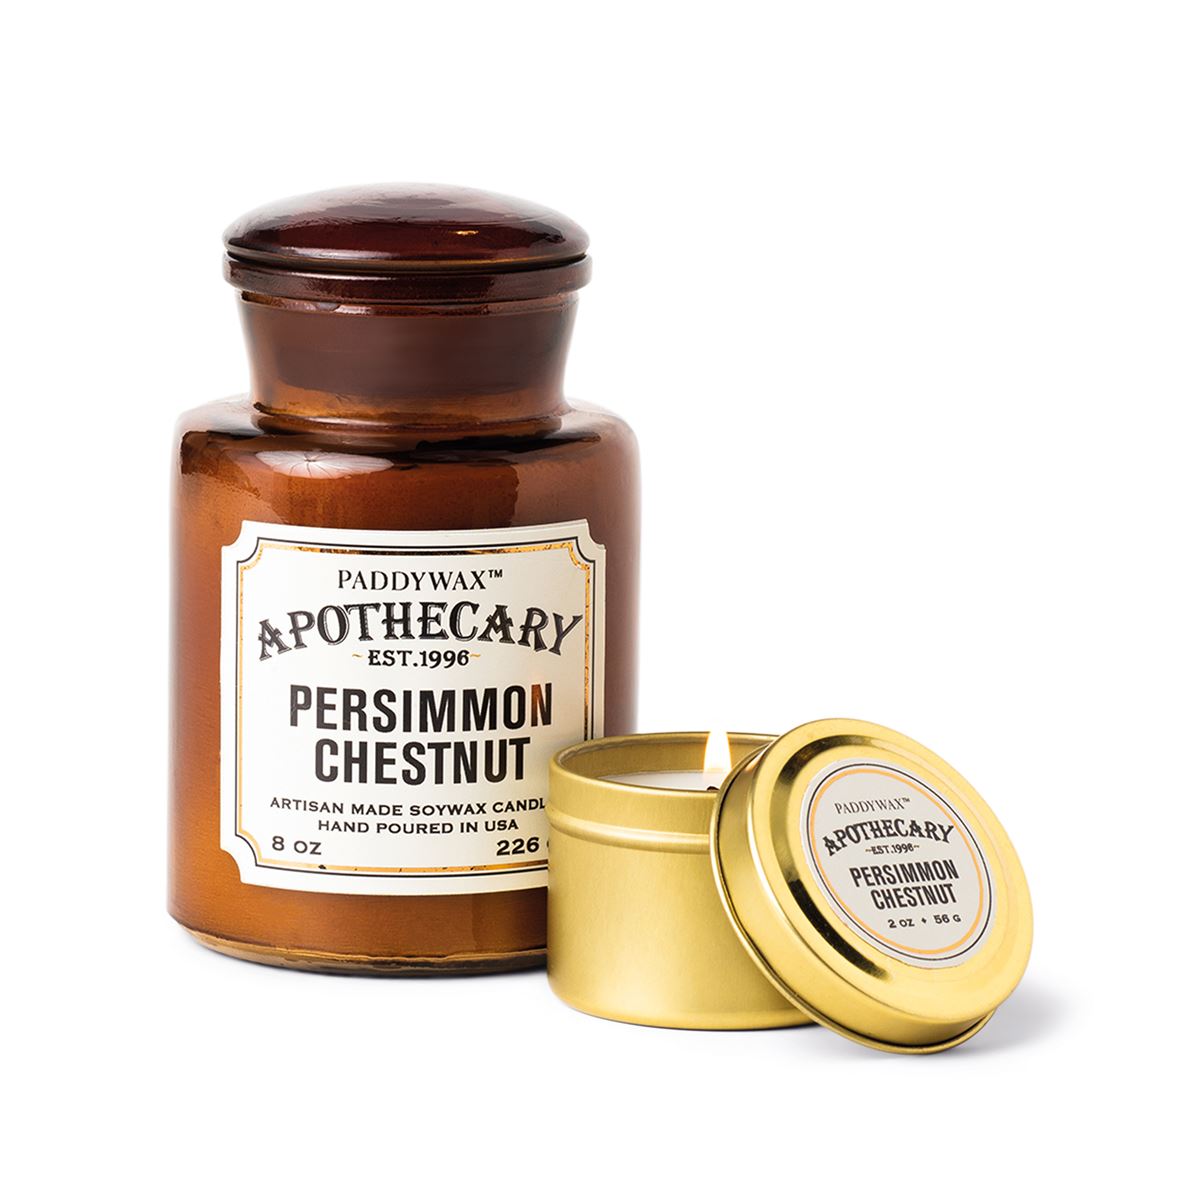 Persimmon + Chestnut Apothecary Candle